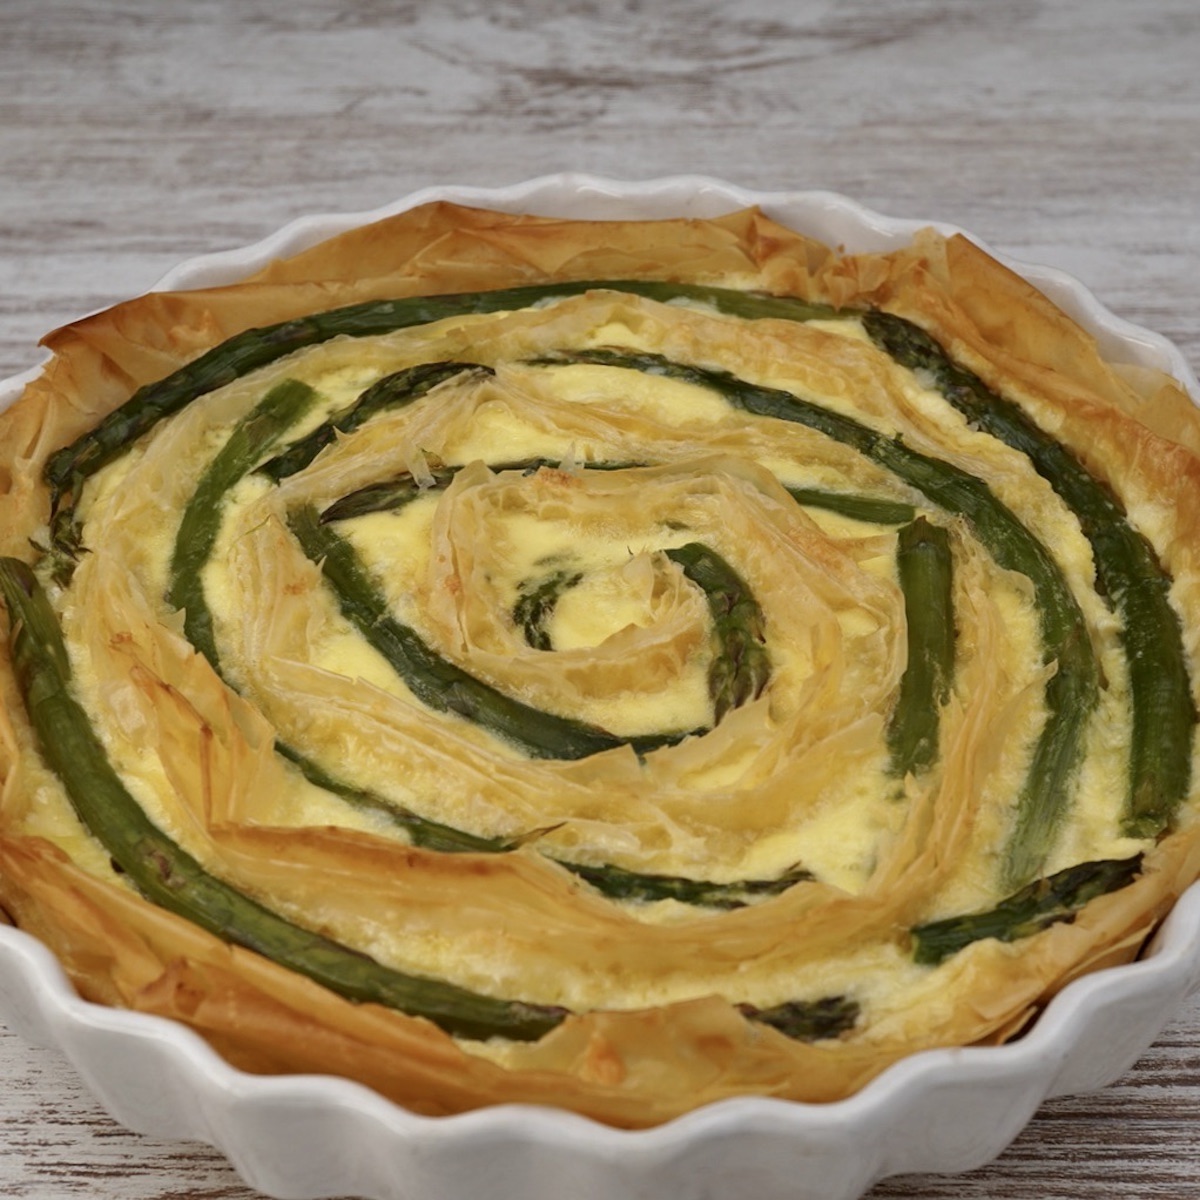 Asparagus quiche made using filo pastry.